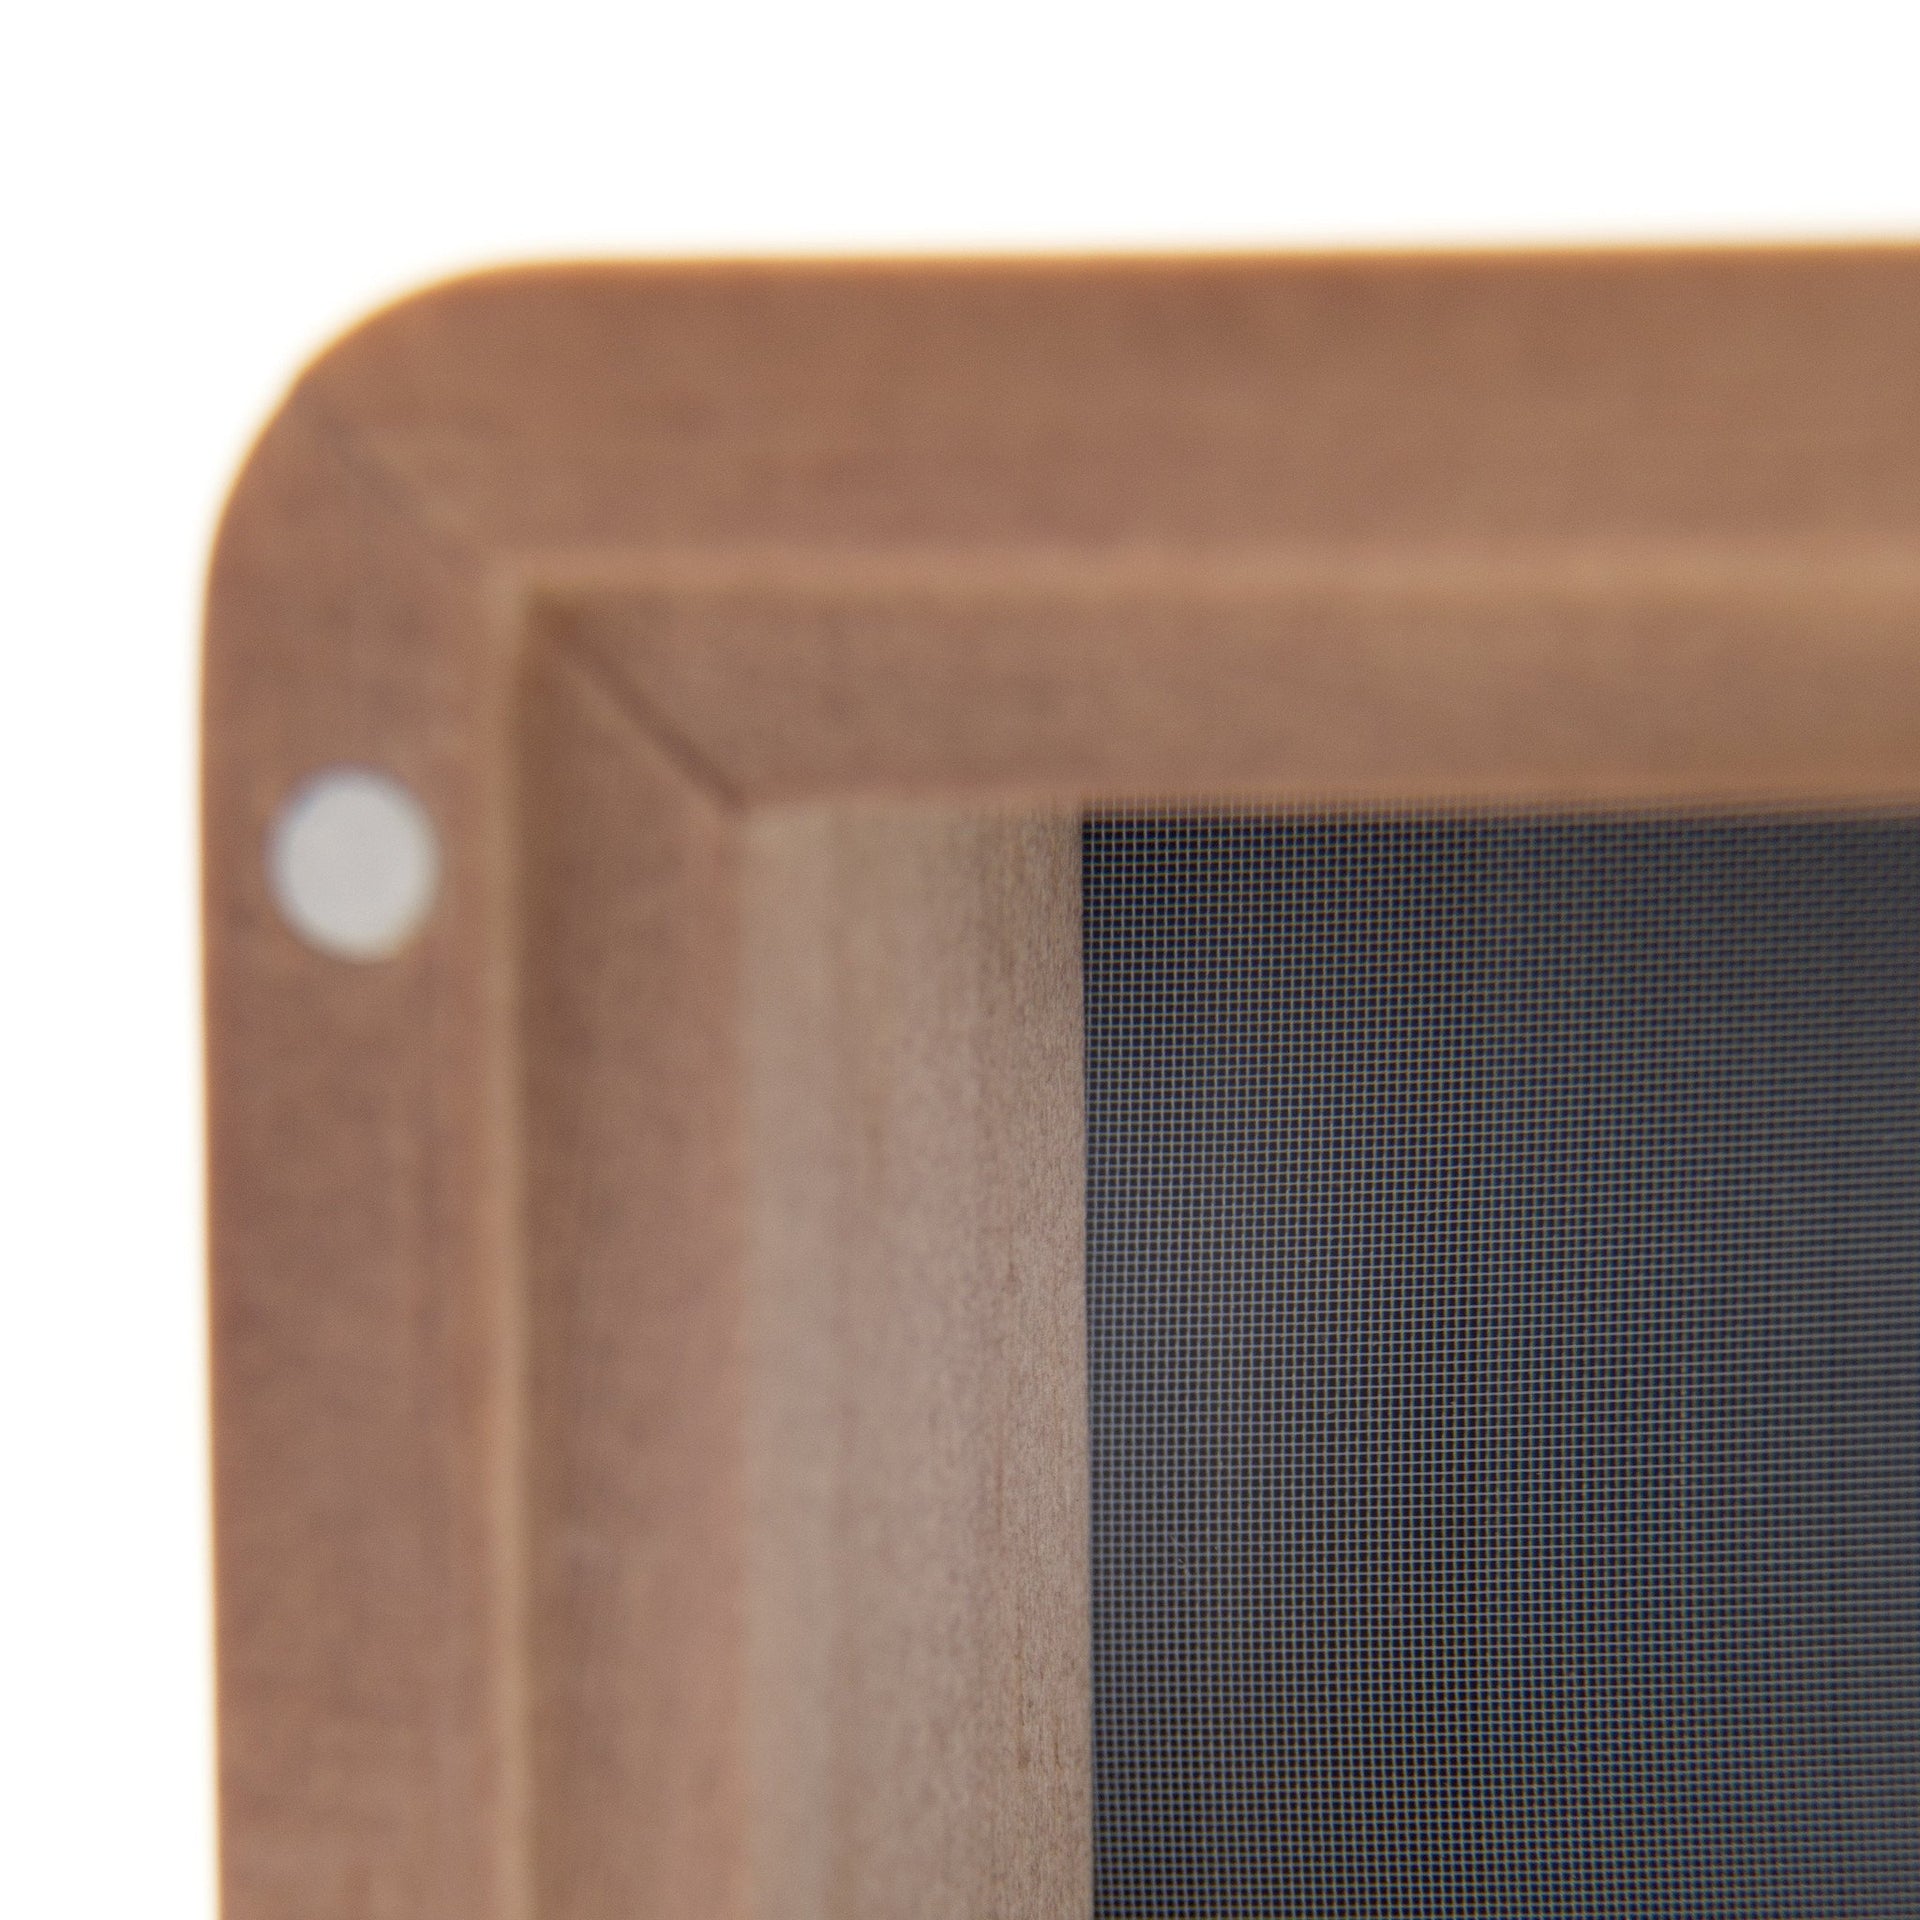 RYOT 4x7 Solid Top Screen Box - Walnut - 420 Science - The most trusted online smoke shop.